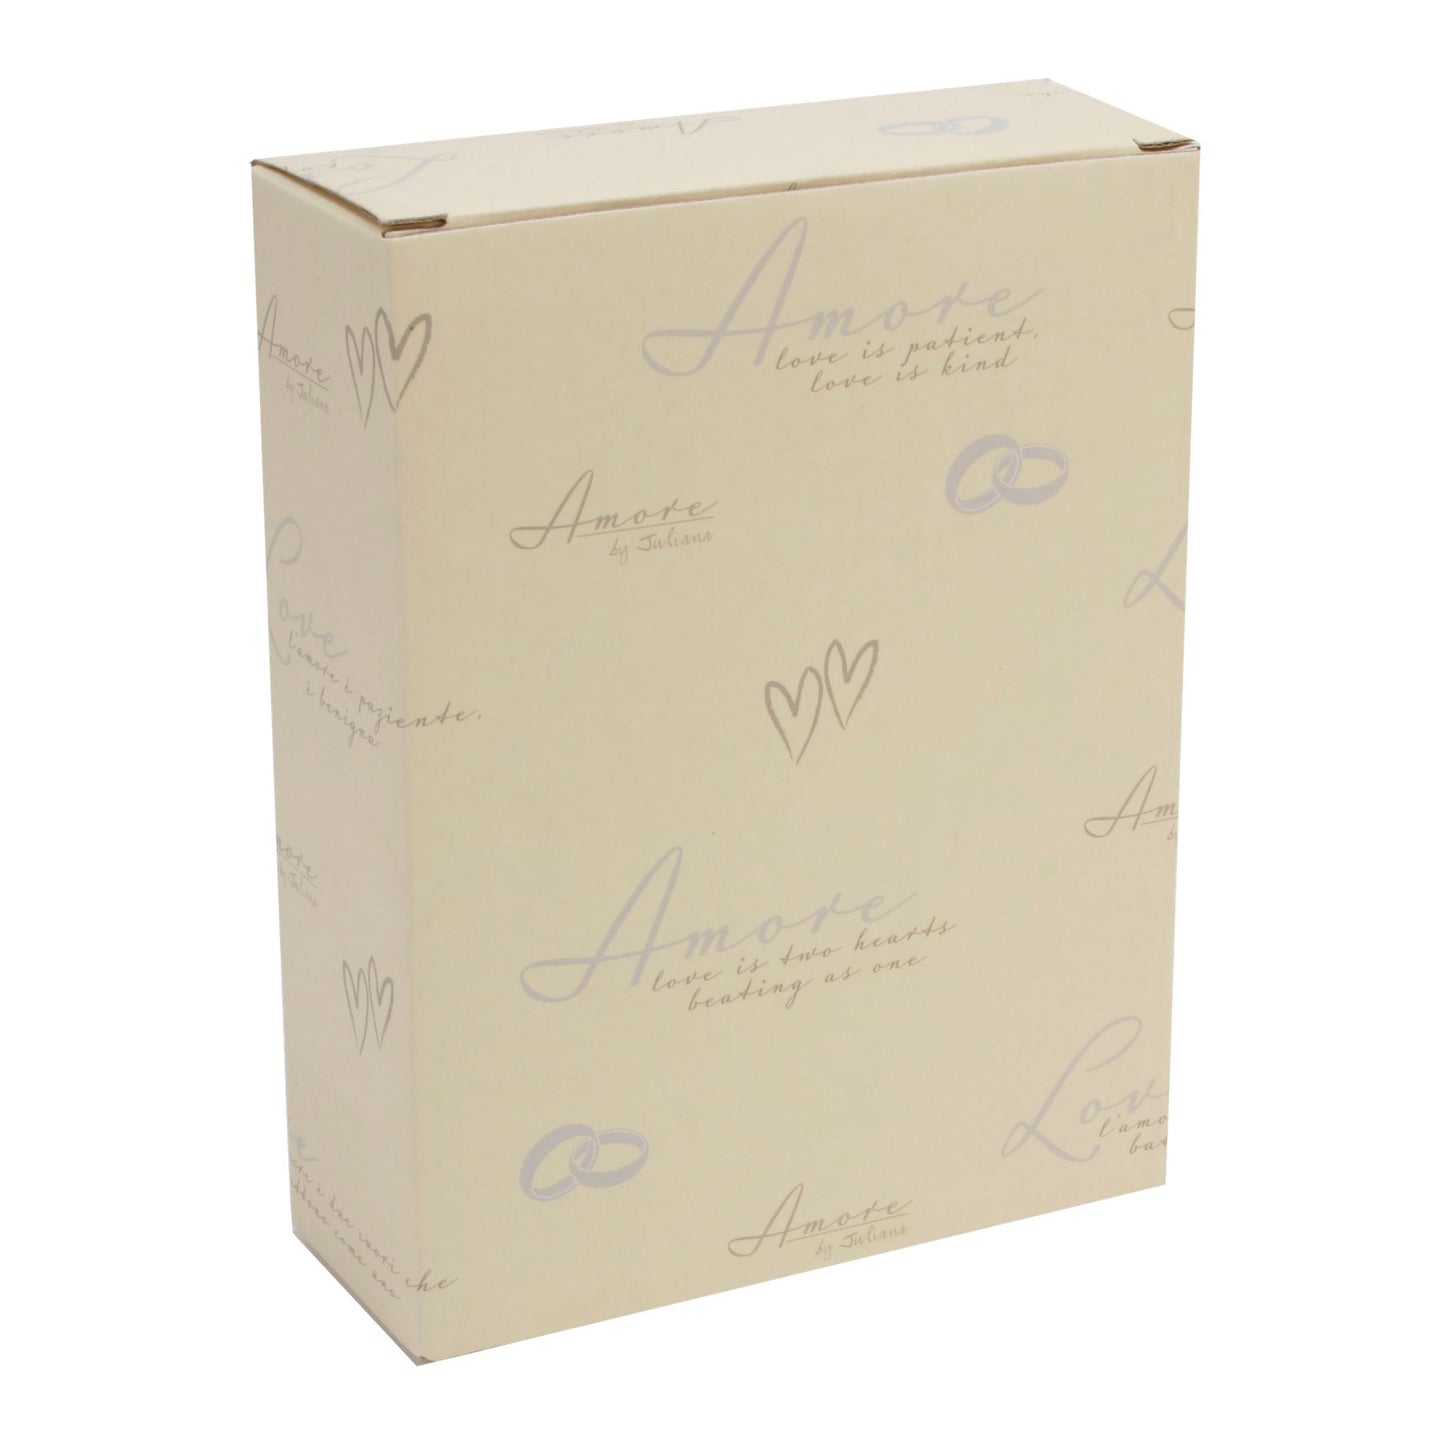 Amore Suede Wedding Album Holds 100 7" x 5" Pictures